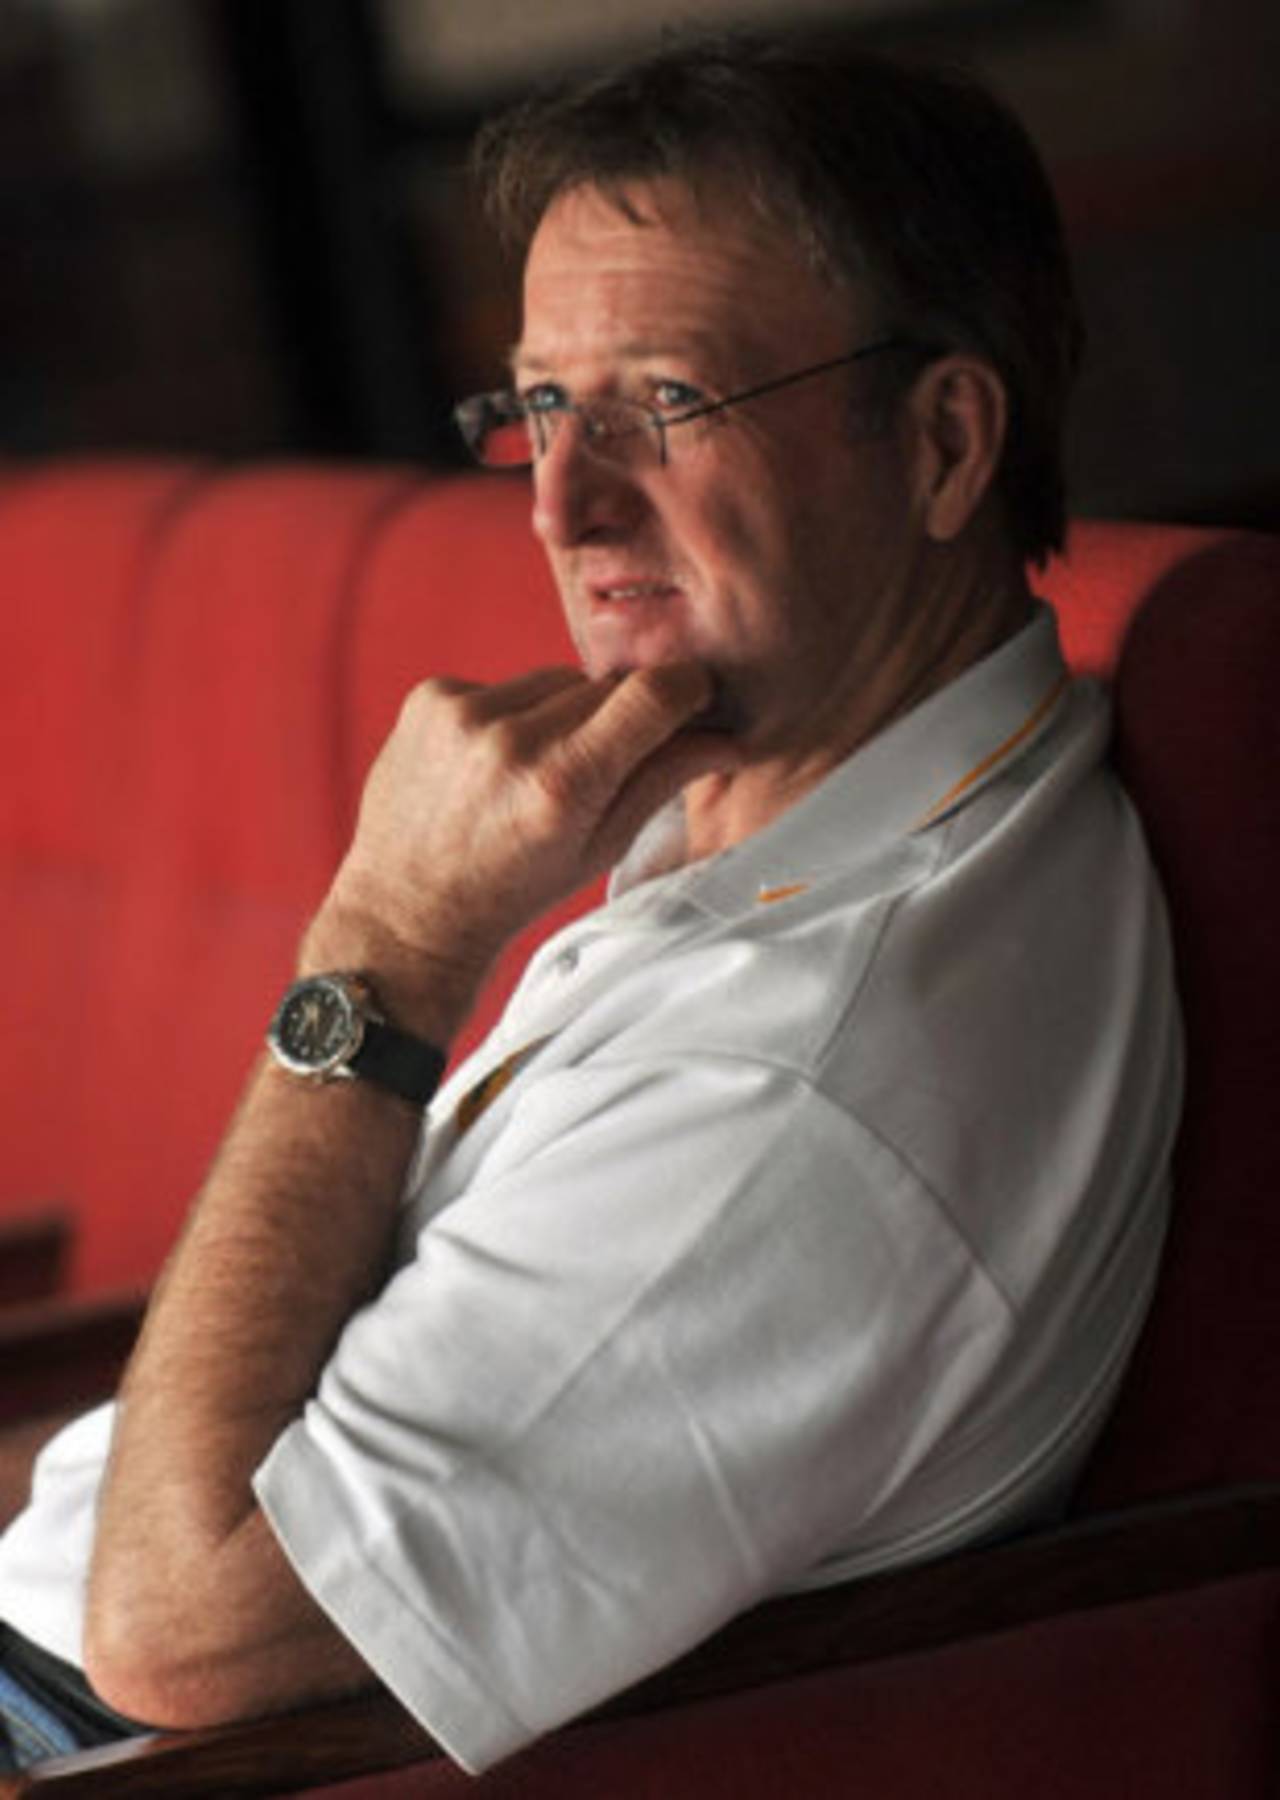 Geoff Lawson in a pensive mood at the National Stadium in Karachi, March 11, 2008